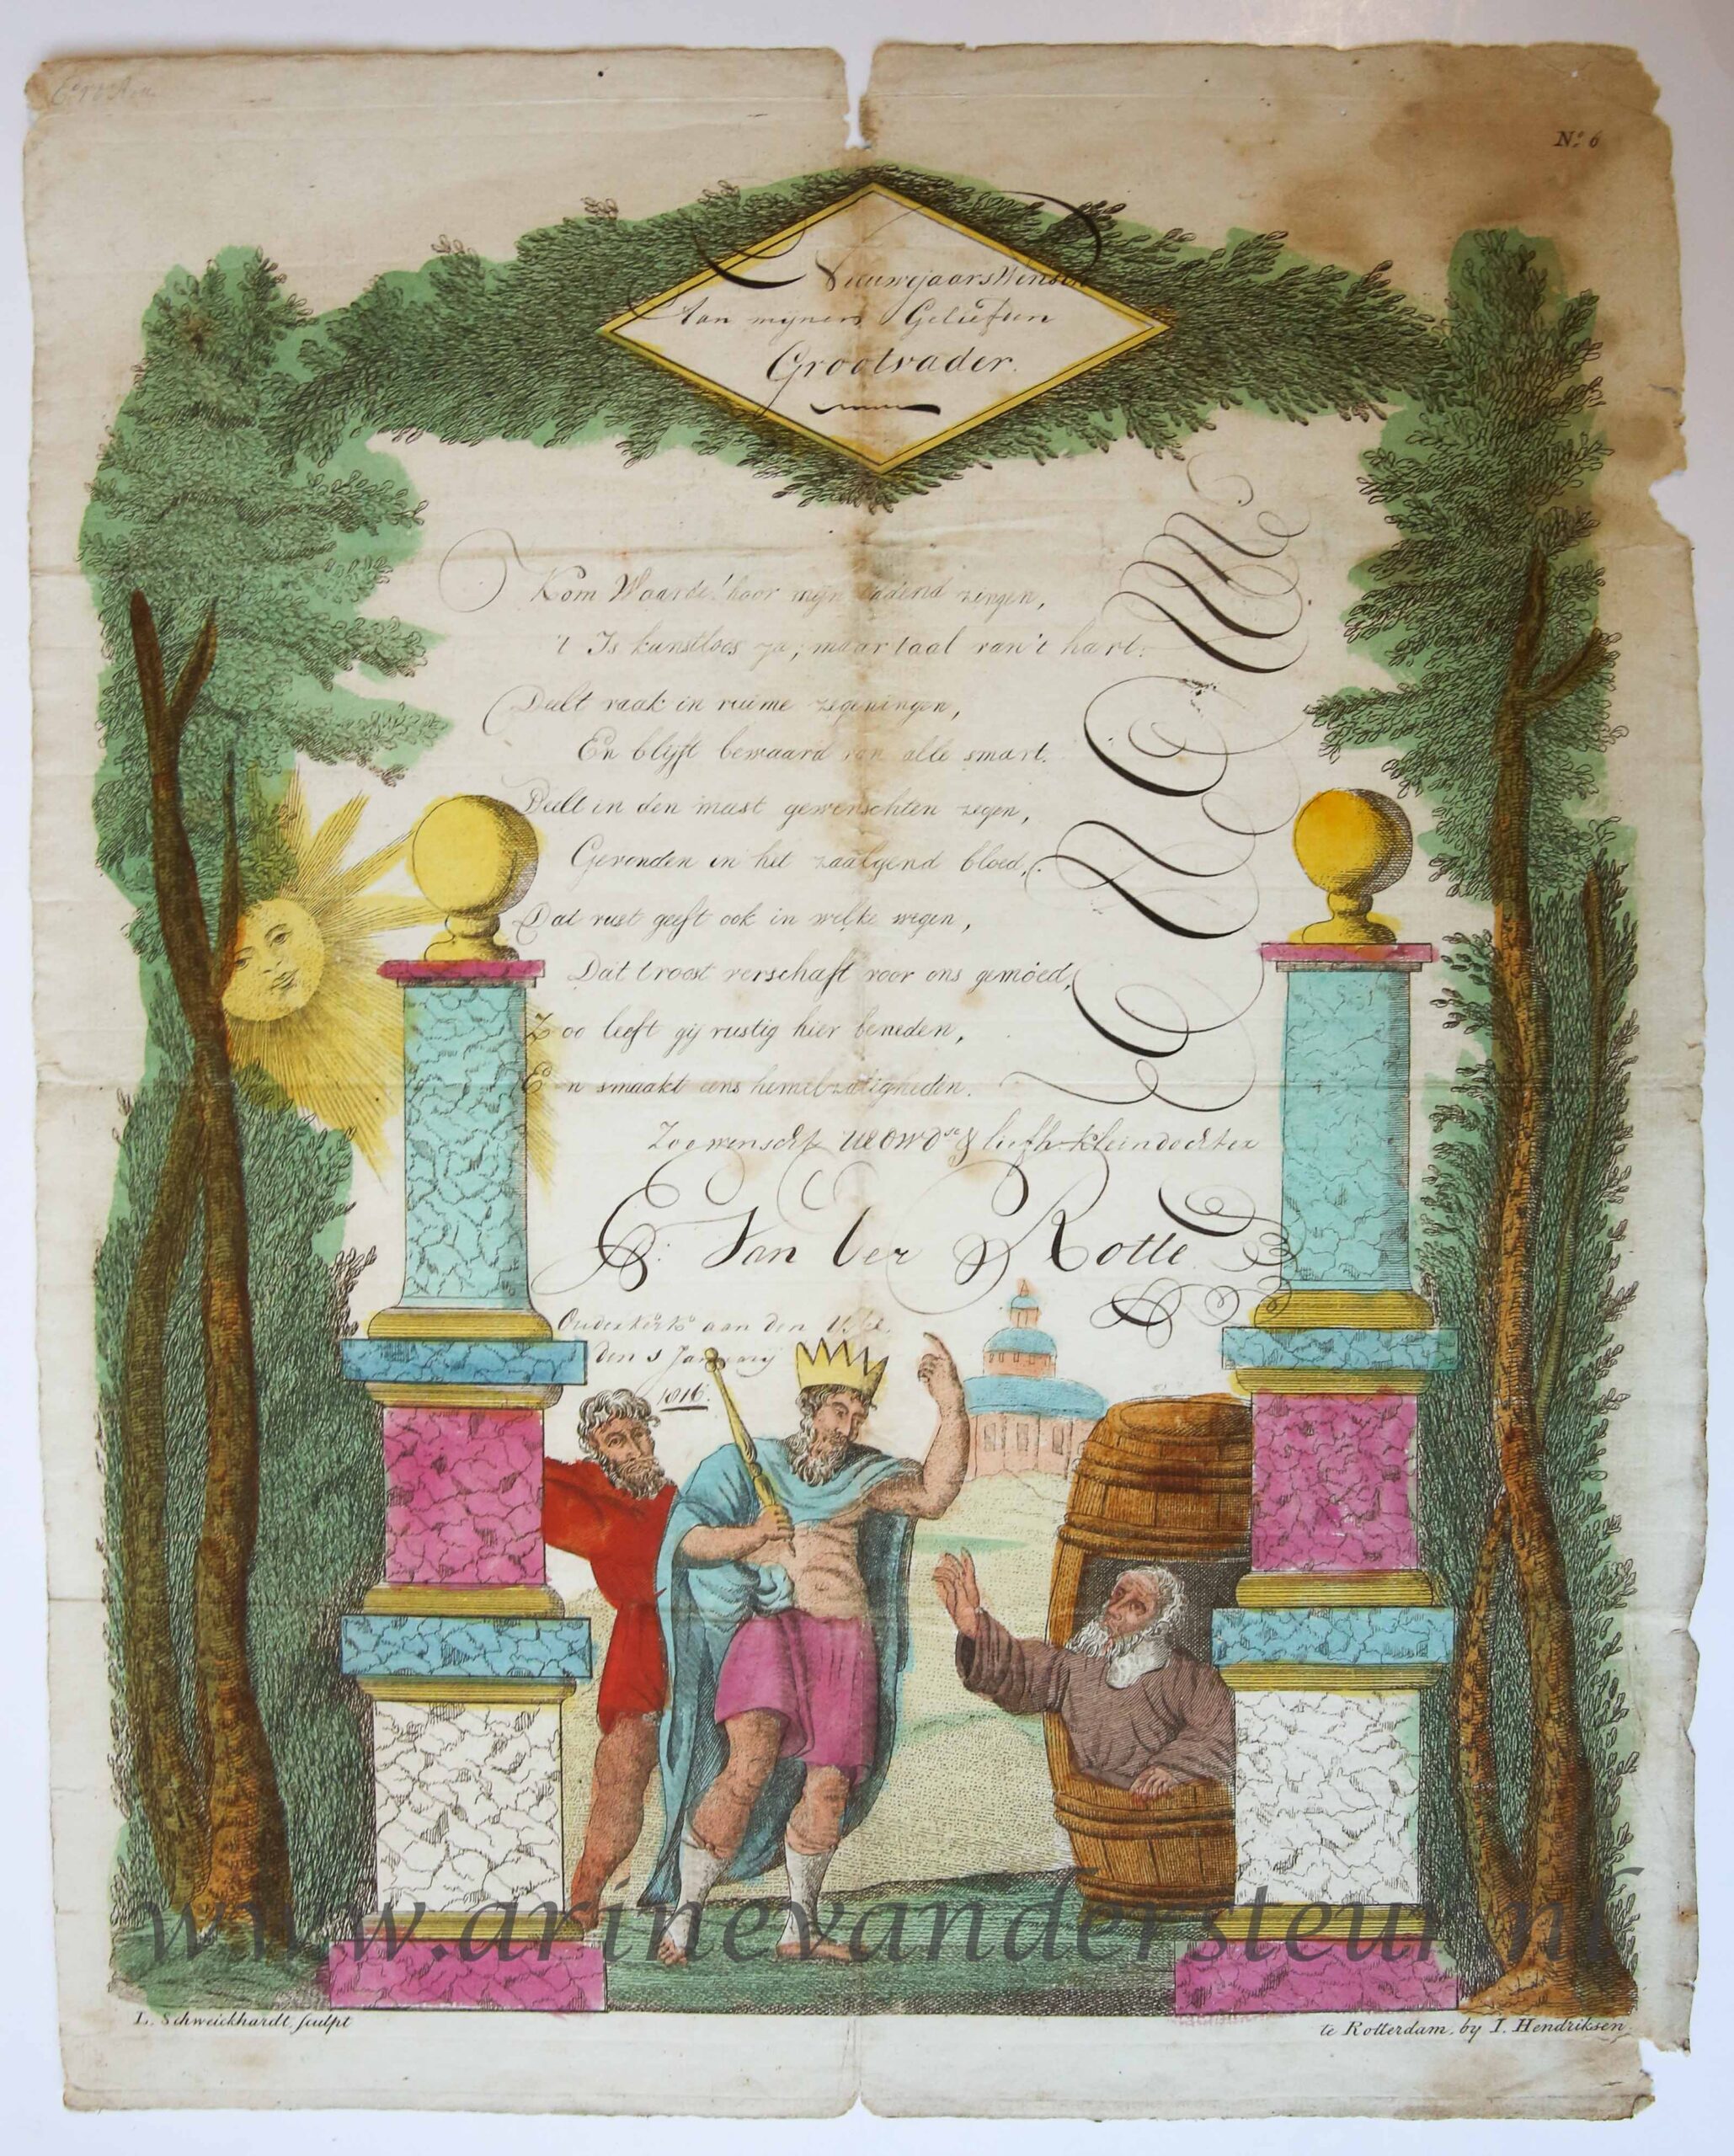 [Nieuwjaarswensch / New Year Wishes, 1816] C. van der Rotte. Hand colored wish card with Alexander the Great visiting Diogenes in the barrel, dated 1816.